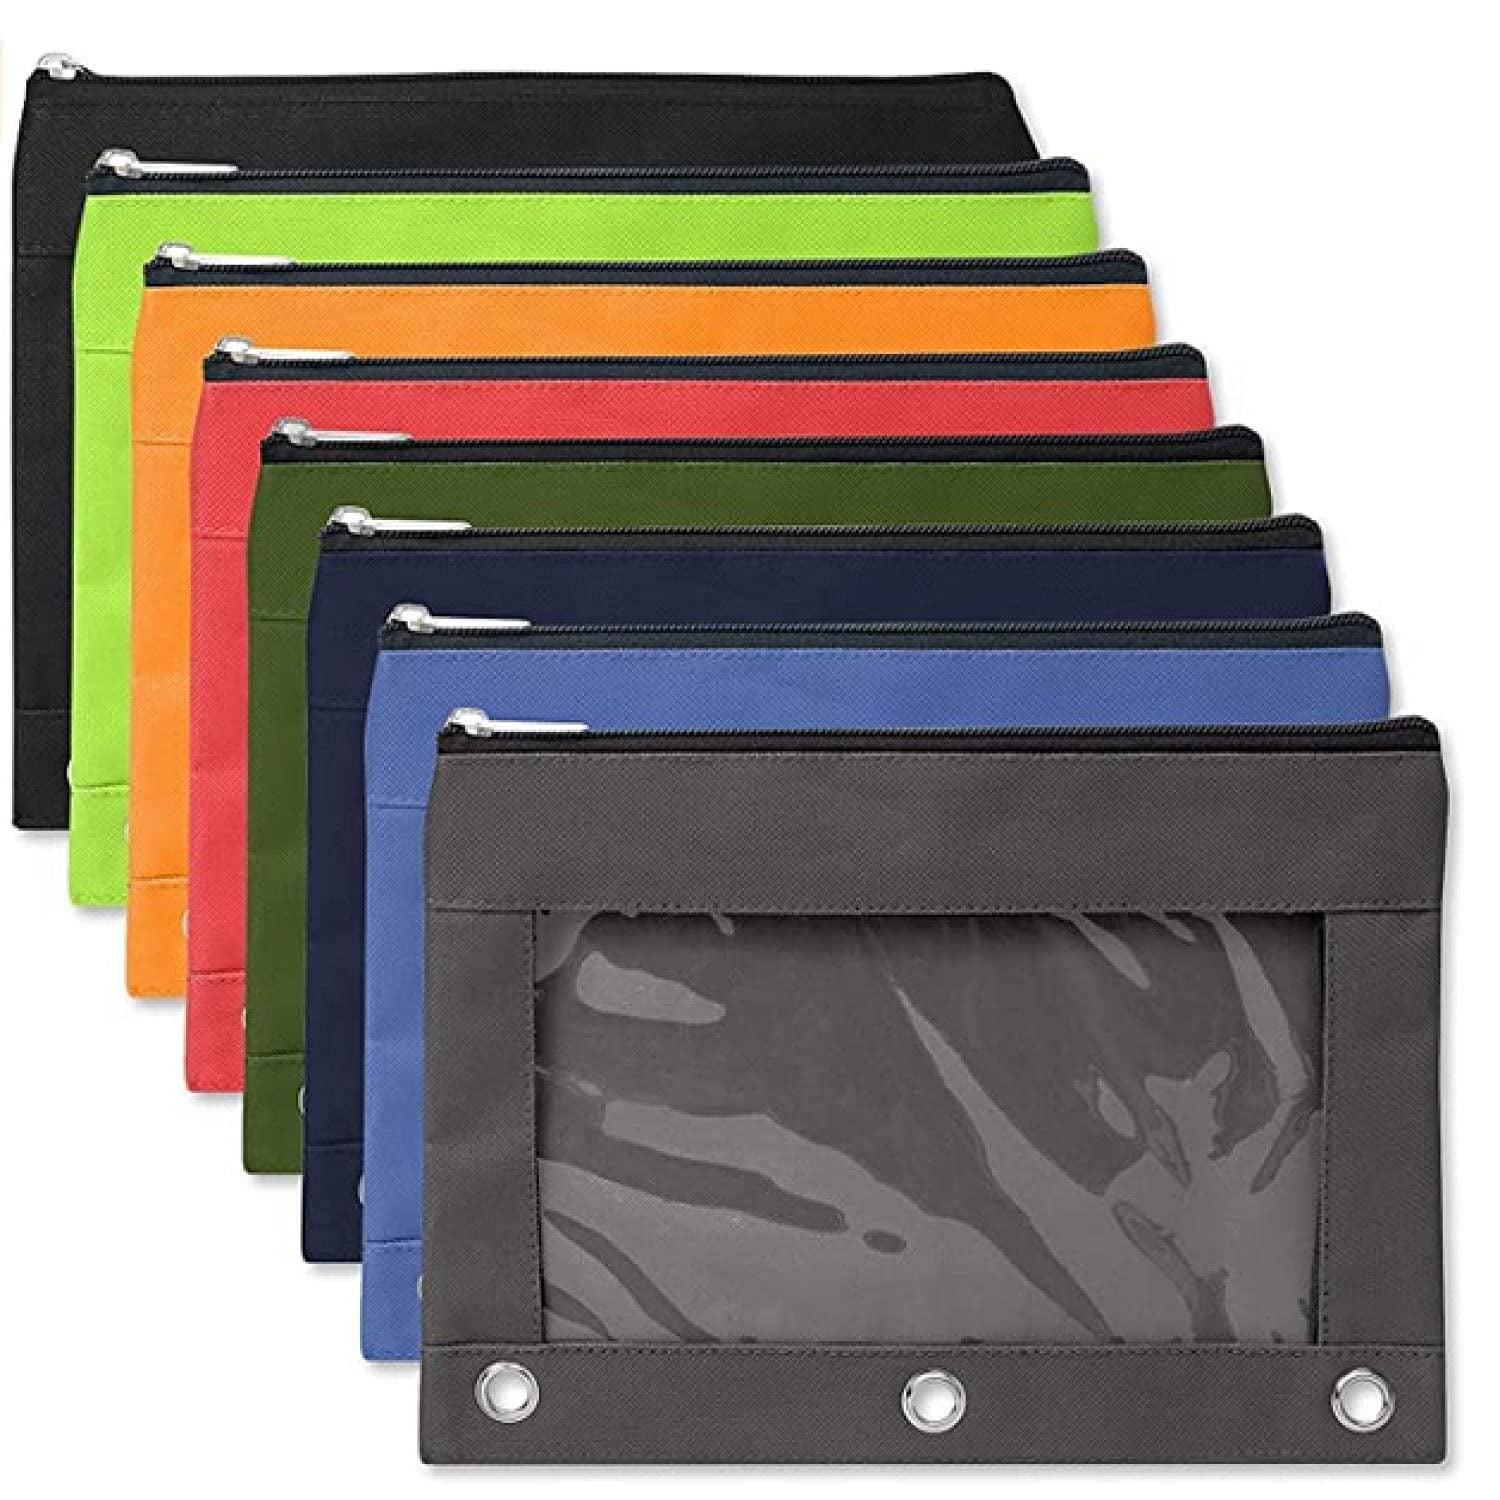 24 Pack of 3 Ring Pencil Pouch with Clear See Through Window - 24 Bulk  Pack Bundle (Color Pack 1) 